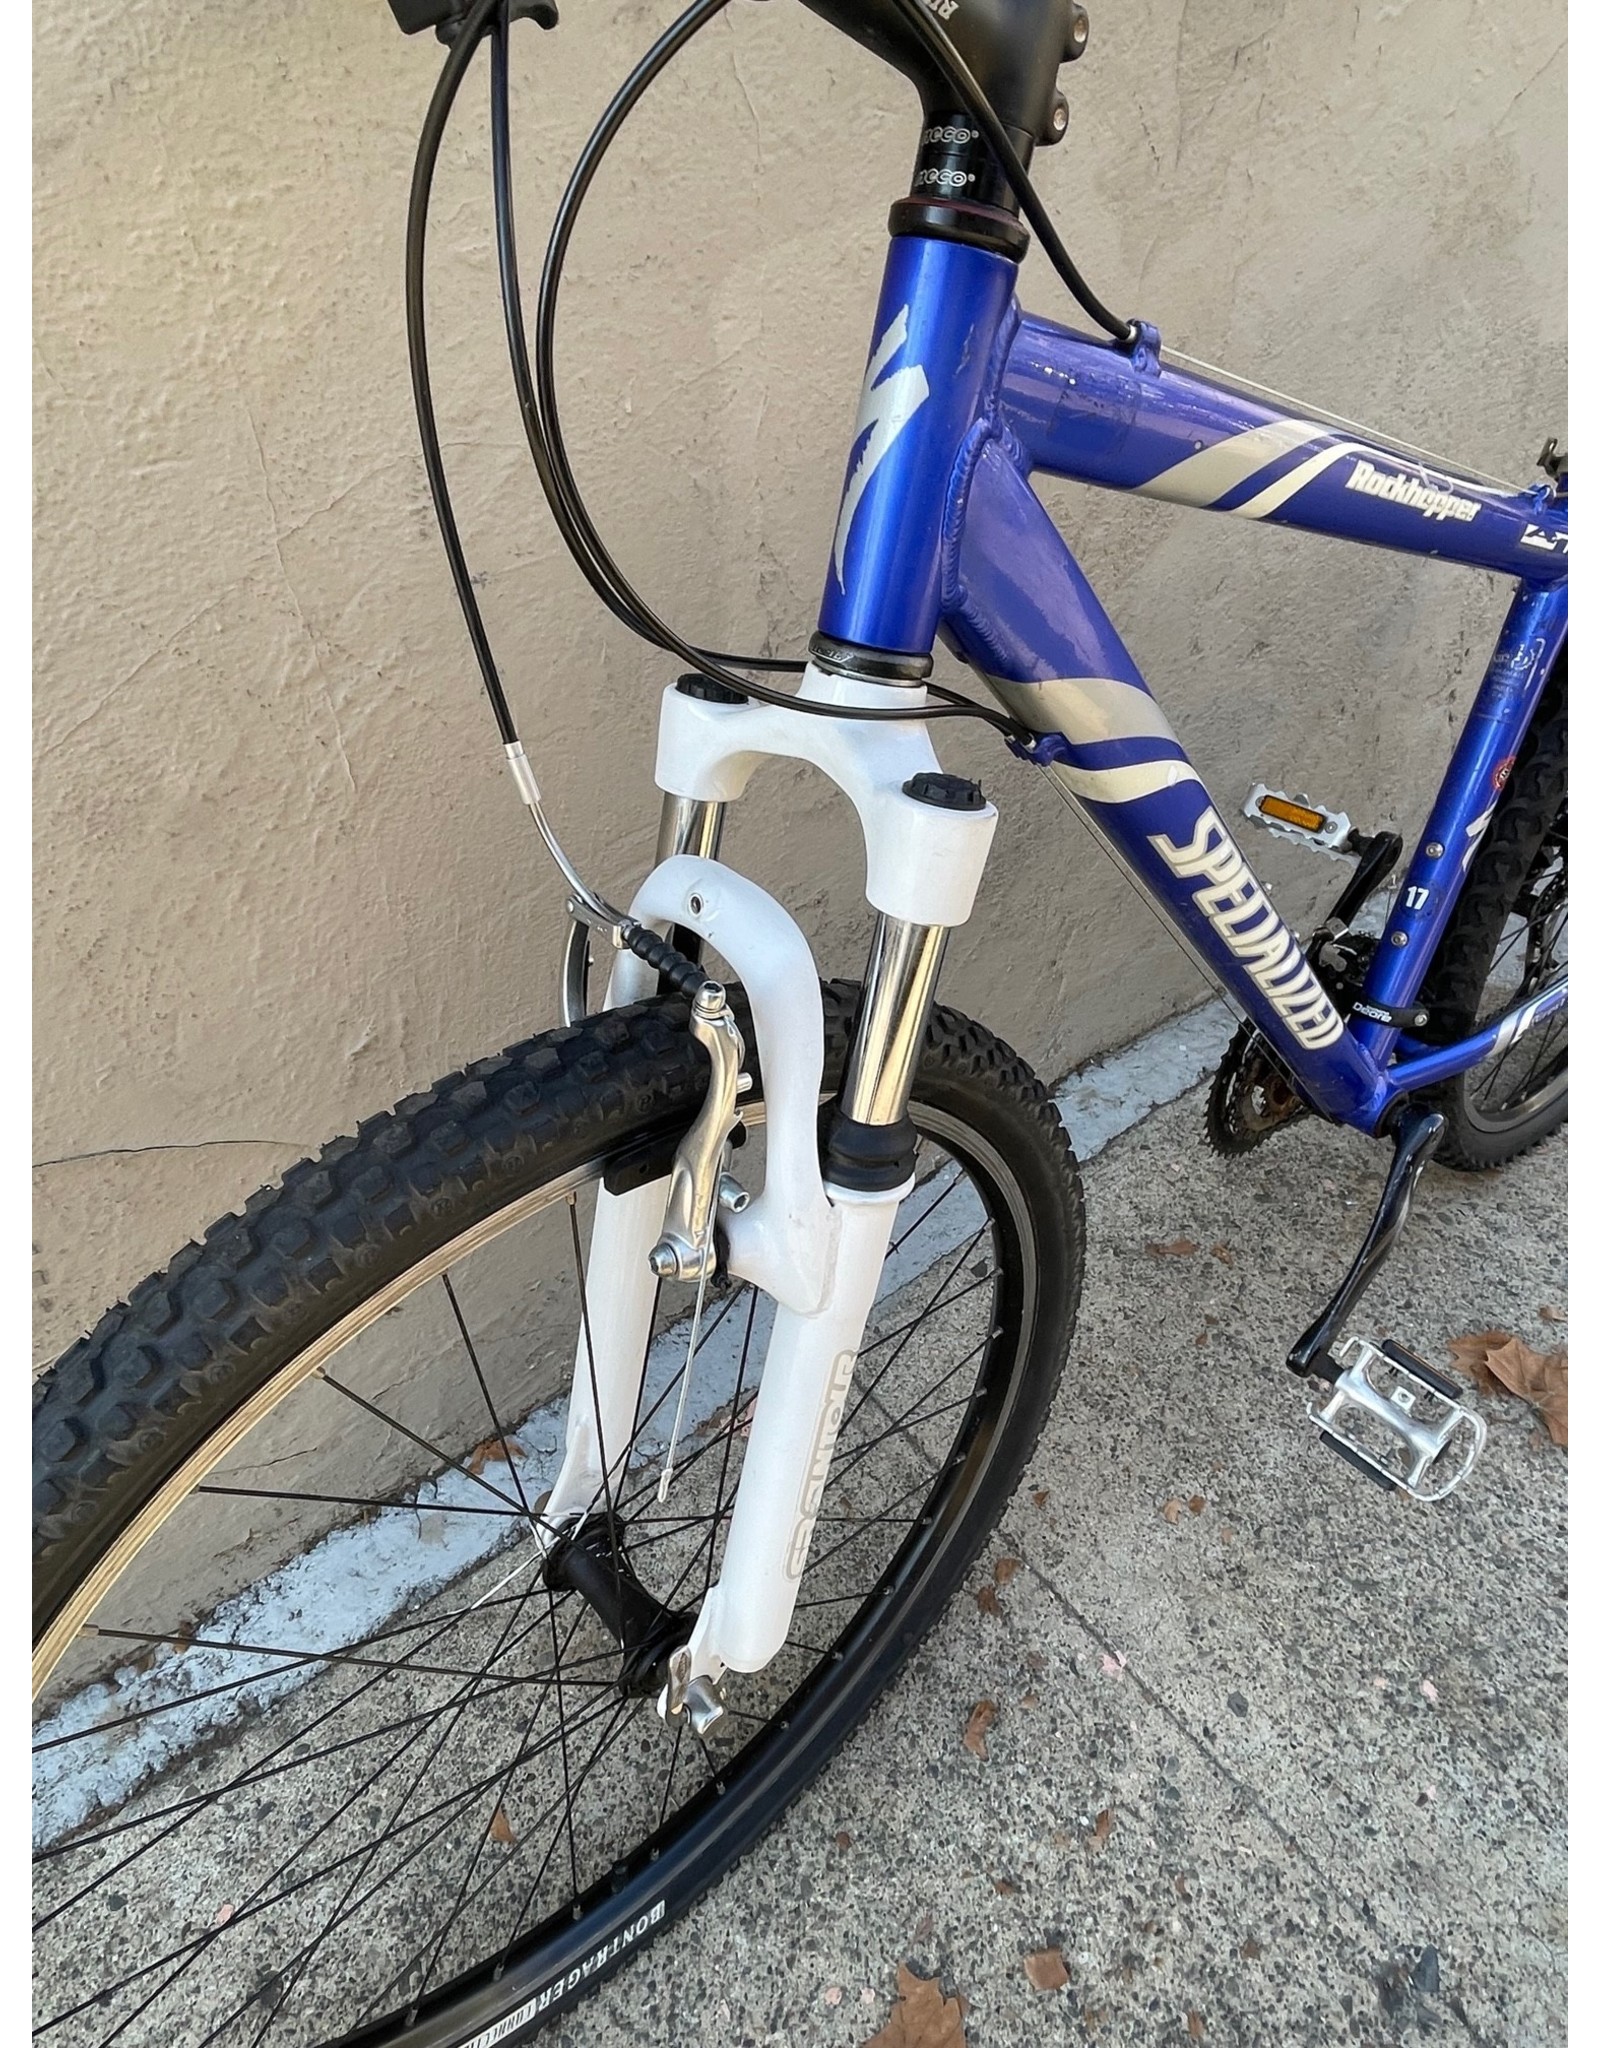 Specialized Specialized Rockhopper, 17.5 Inches, Blue